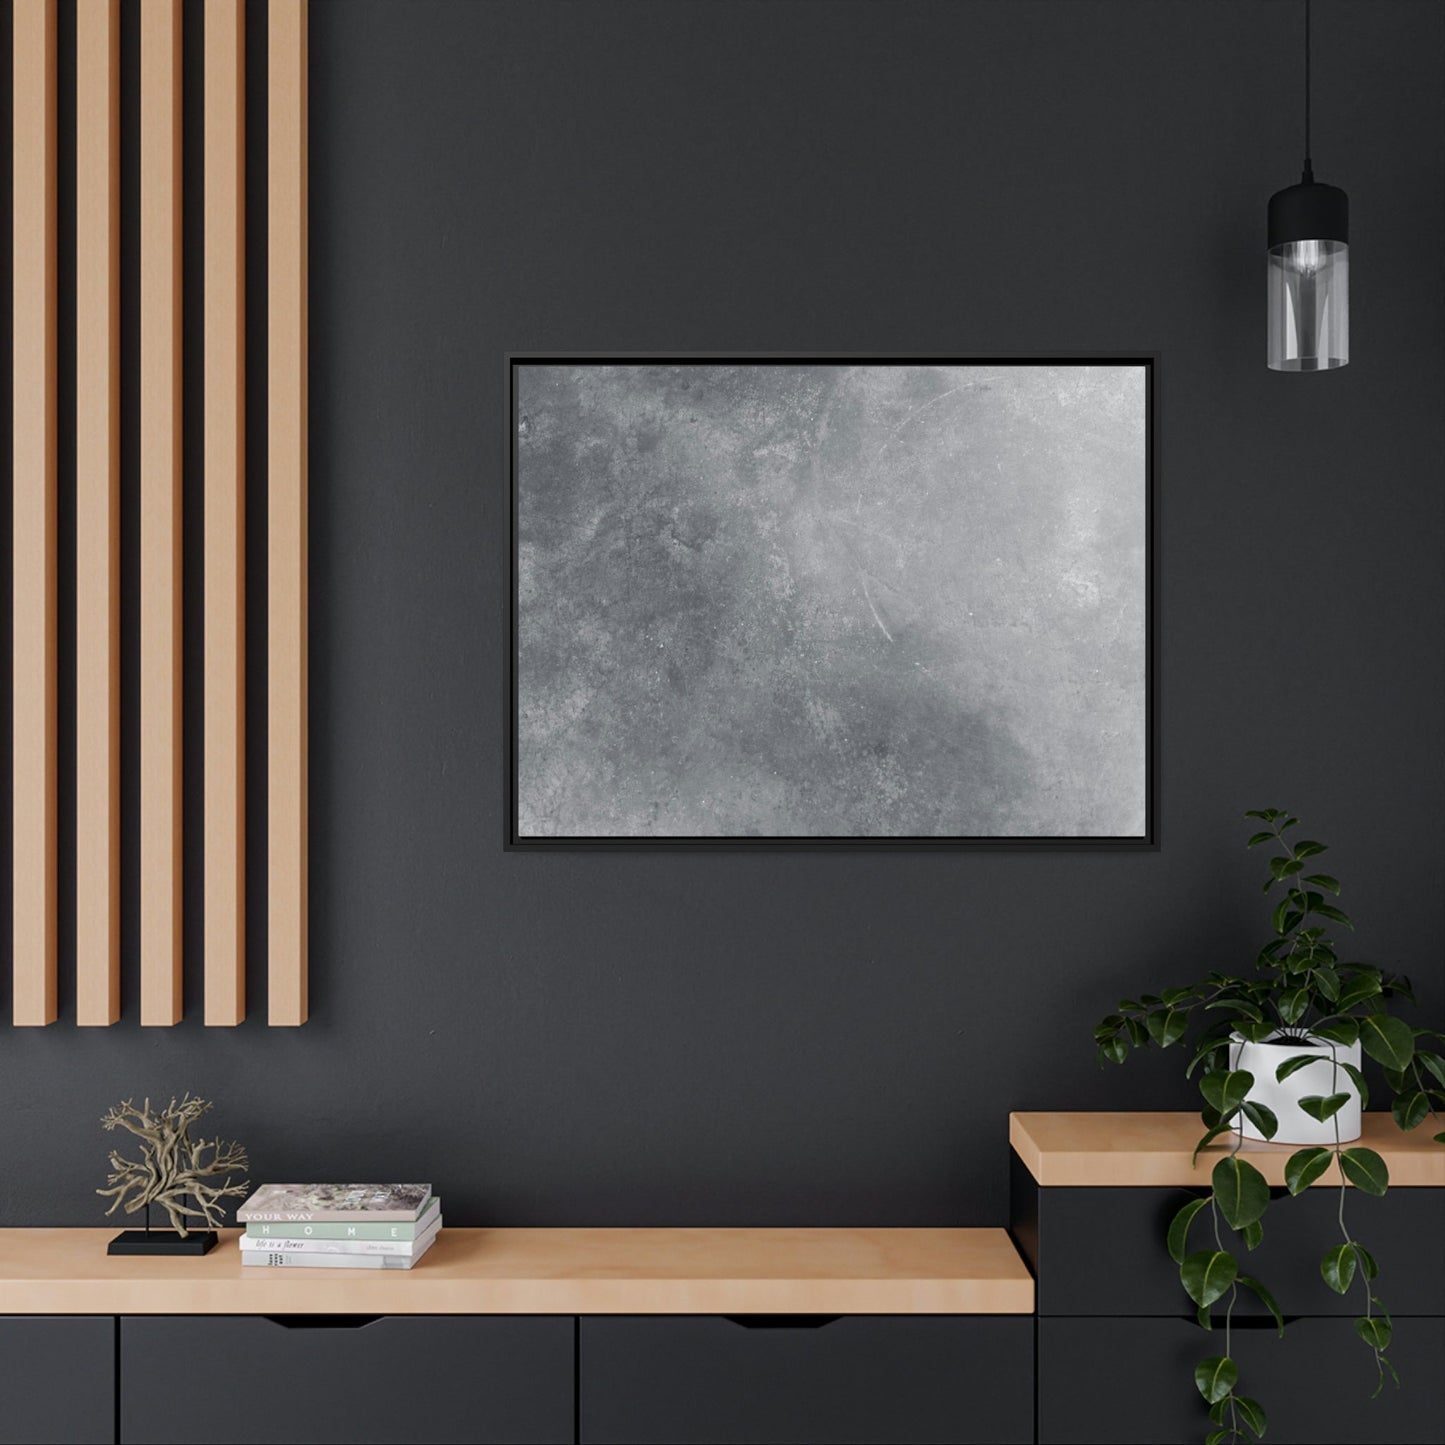 Shades of Gray: Poster & Canvas Wall Art for a Modern Look